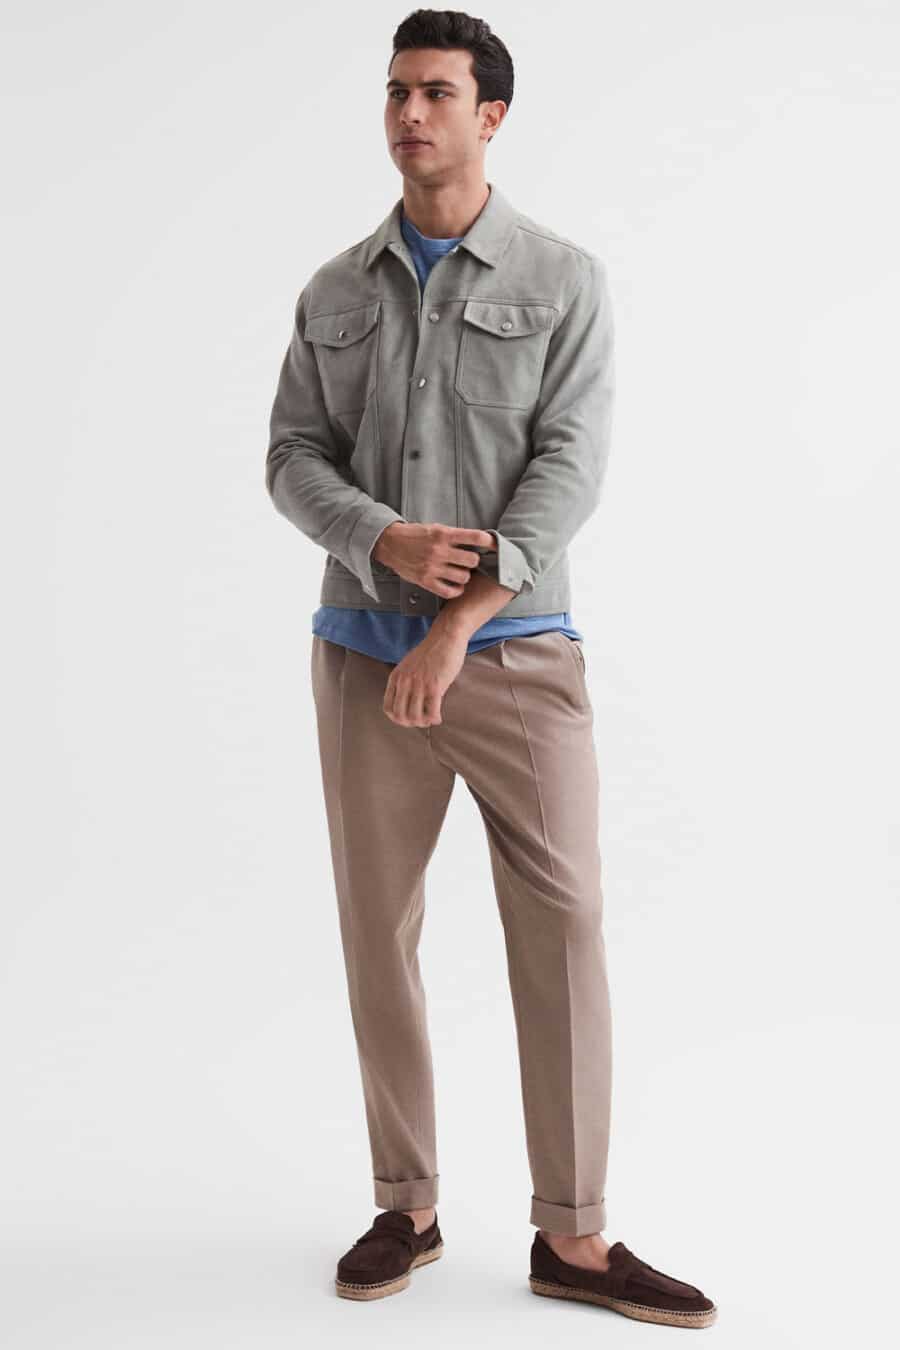 Men's light brown pants, mid blue T-shirt, grey suede trucker jacket and brown suede loafer-espadrilles outfit